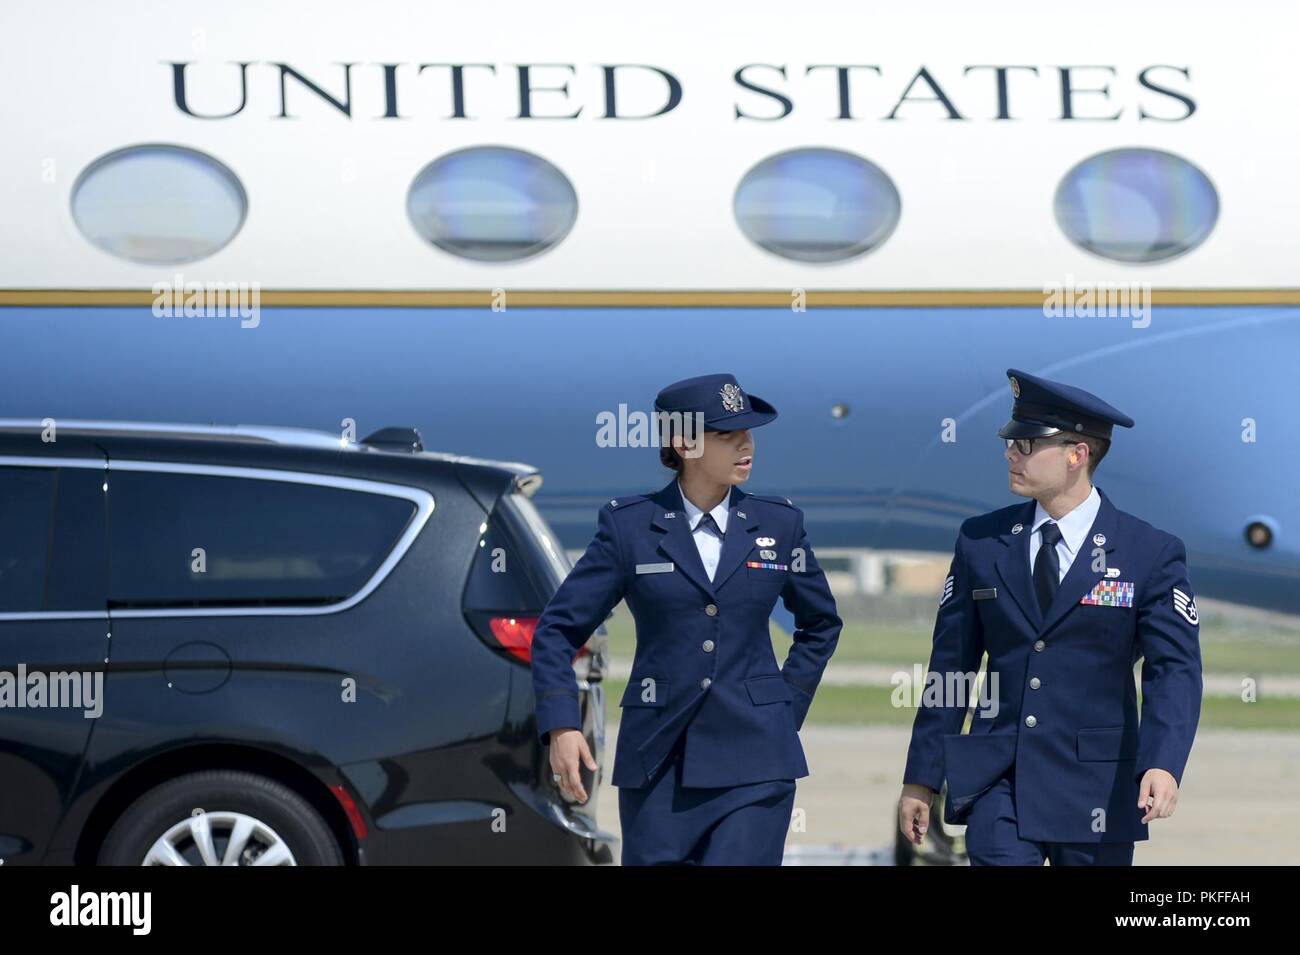 (From left) 1st Lt. Kassandra Prusko and Staff Sgt. Joseph Shank depart the flight line after executing their duties as the official greeting party upon the arrival of a U.S. Official, Aug. 5, 2018 at Joint Base Andrews, Md. The 89th Airlift Wing provides global Special Air Mission airlift, logistics, aerial port and communications for the president, vice president, cabinet members, combatant commanders and other senior military and elected leaders as tasked by the White House, Air Force chief of staff and Air Mobility Command. Stock Photo